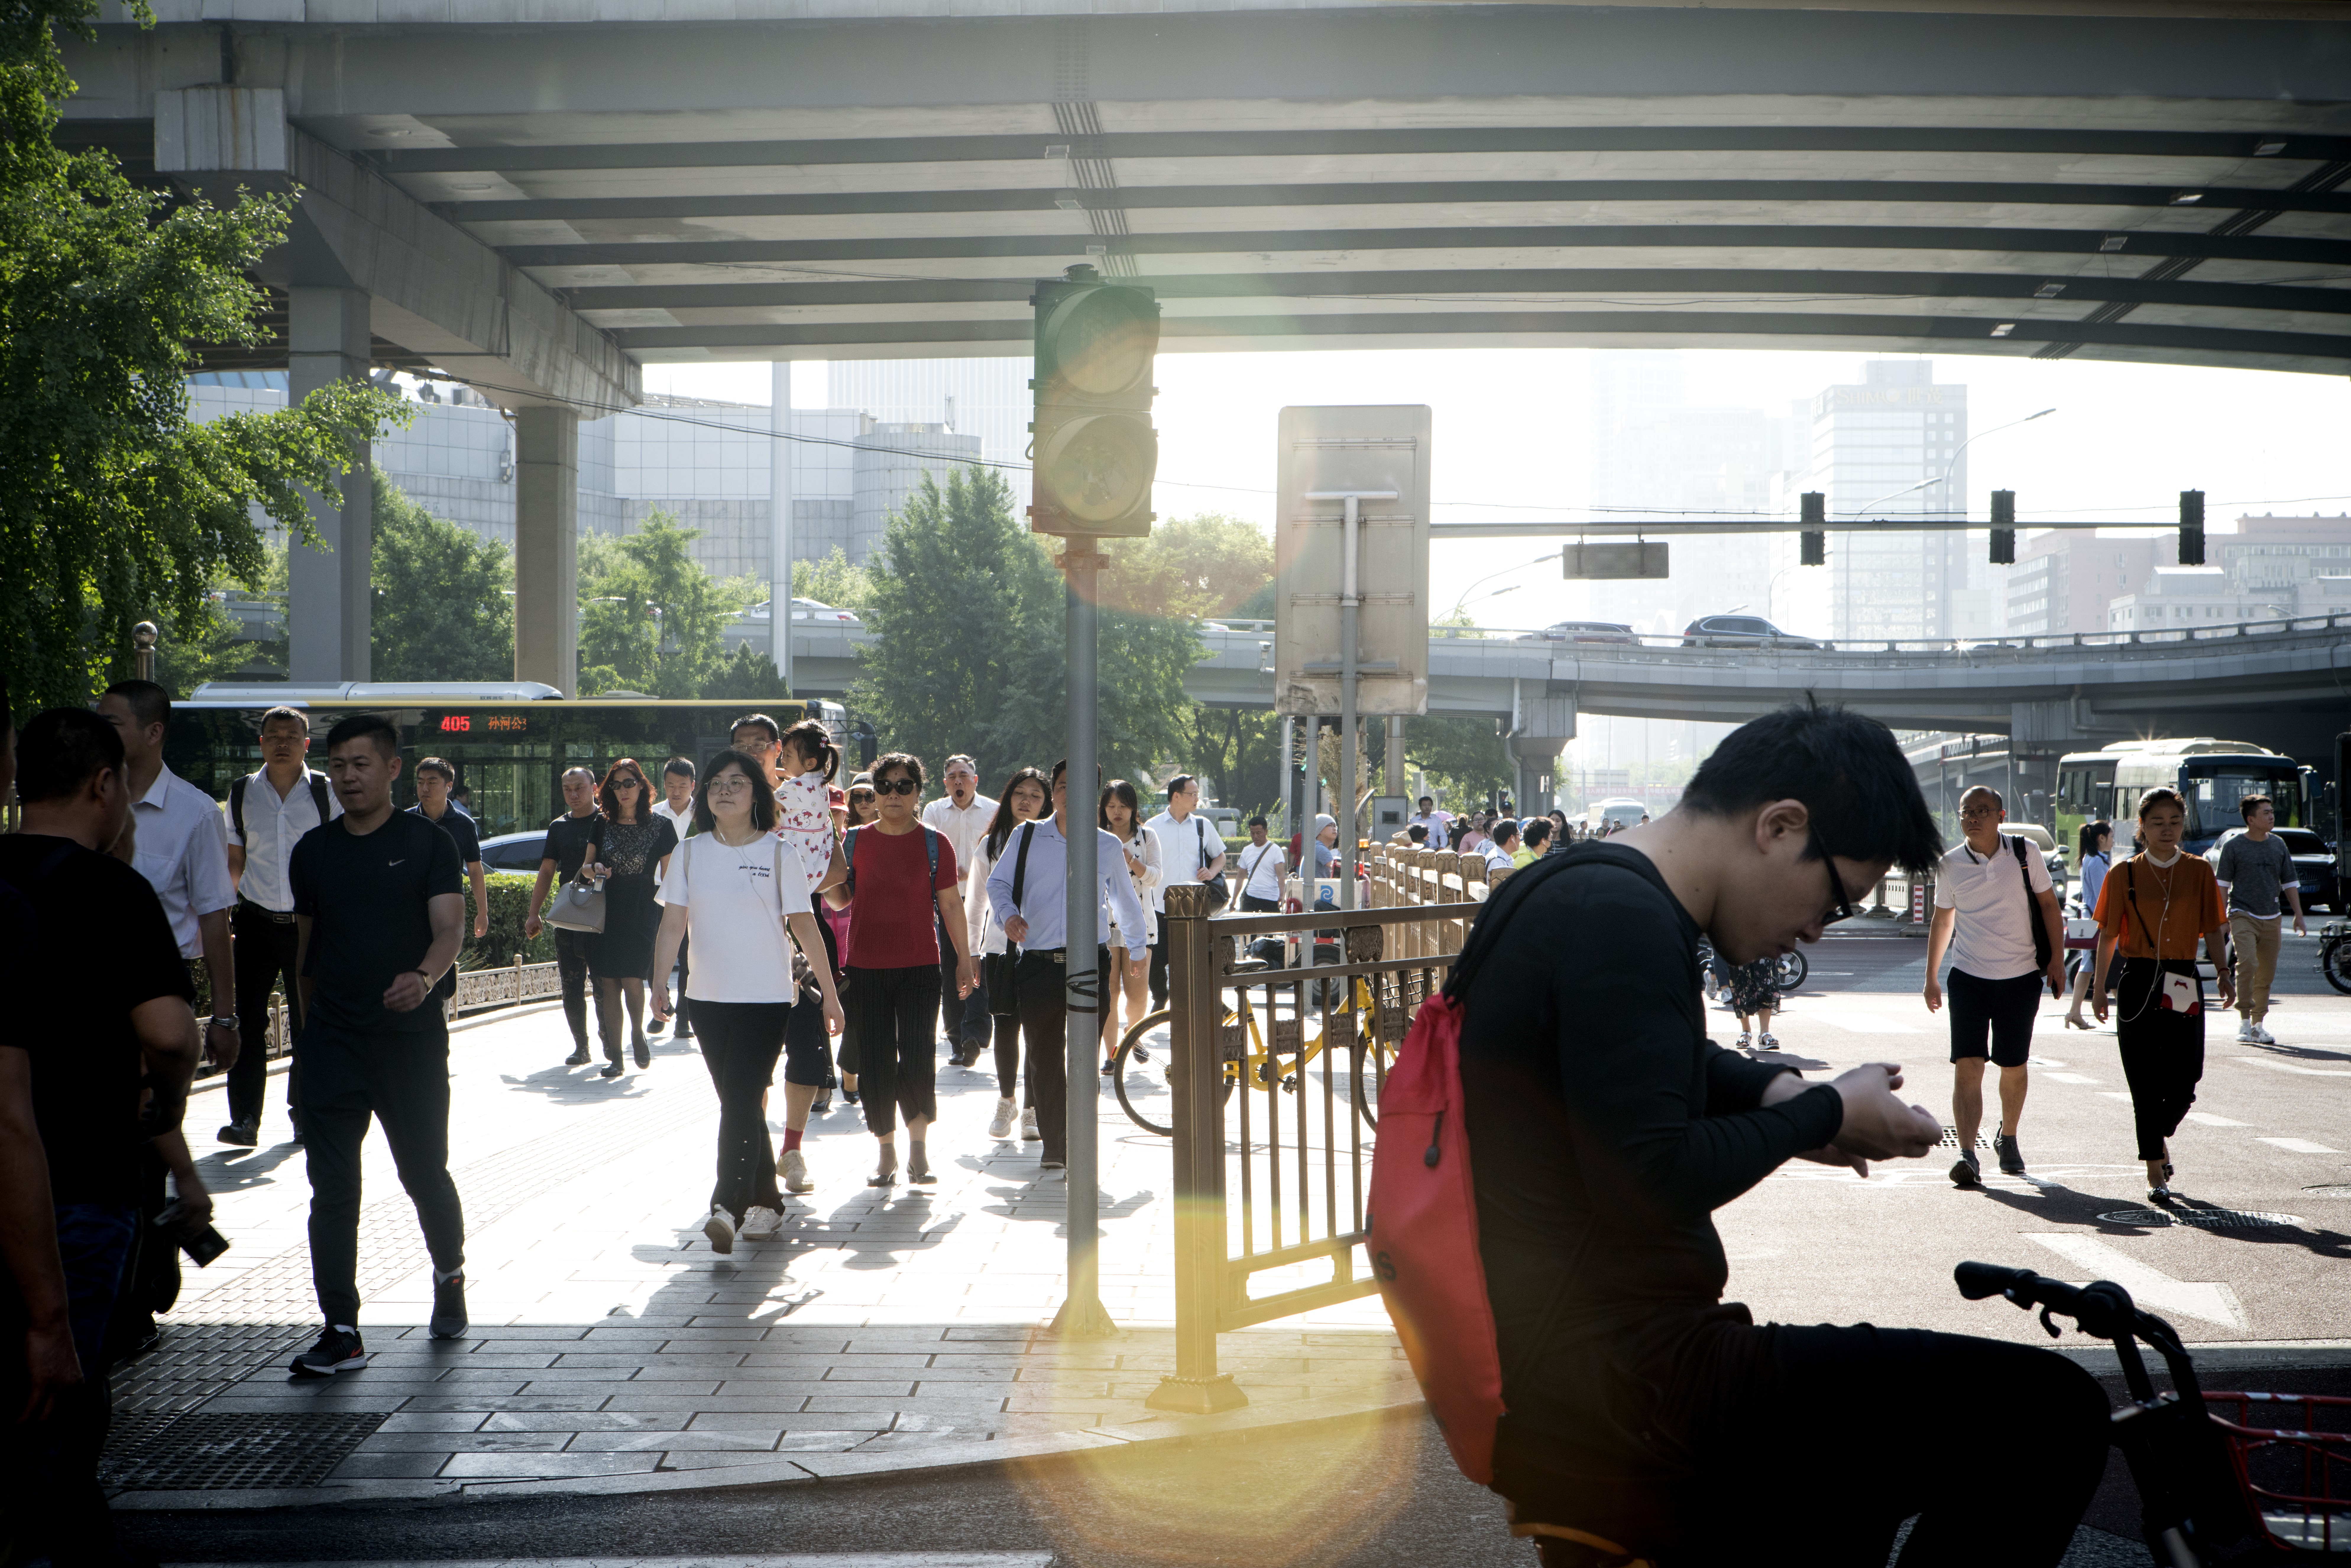 Pedestrians in Beijing’s central business district. Sun Life Everbright Life Insurance has increased its footprint across China since 2010, obtaining licences for 22 provinces and municipal cities. Photo: Bloomberg